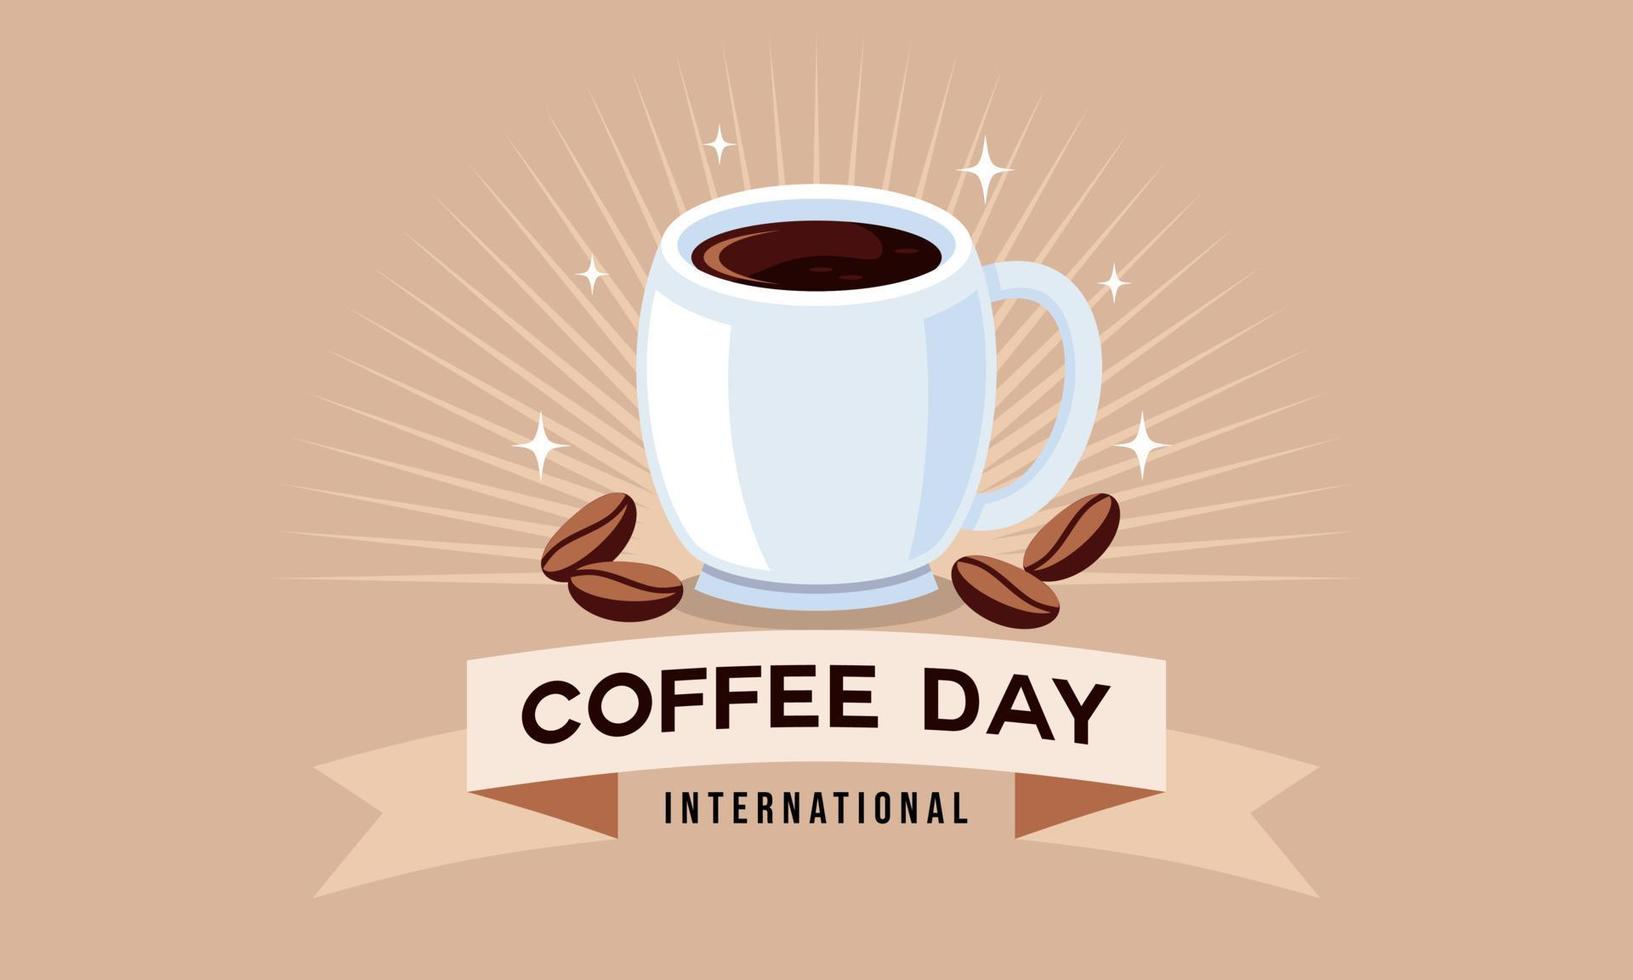 International day of coffee background, coffee cup logo vector